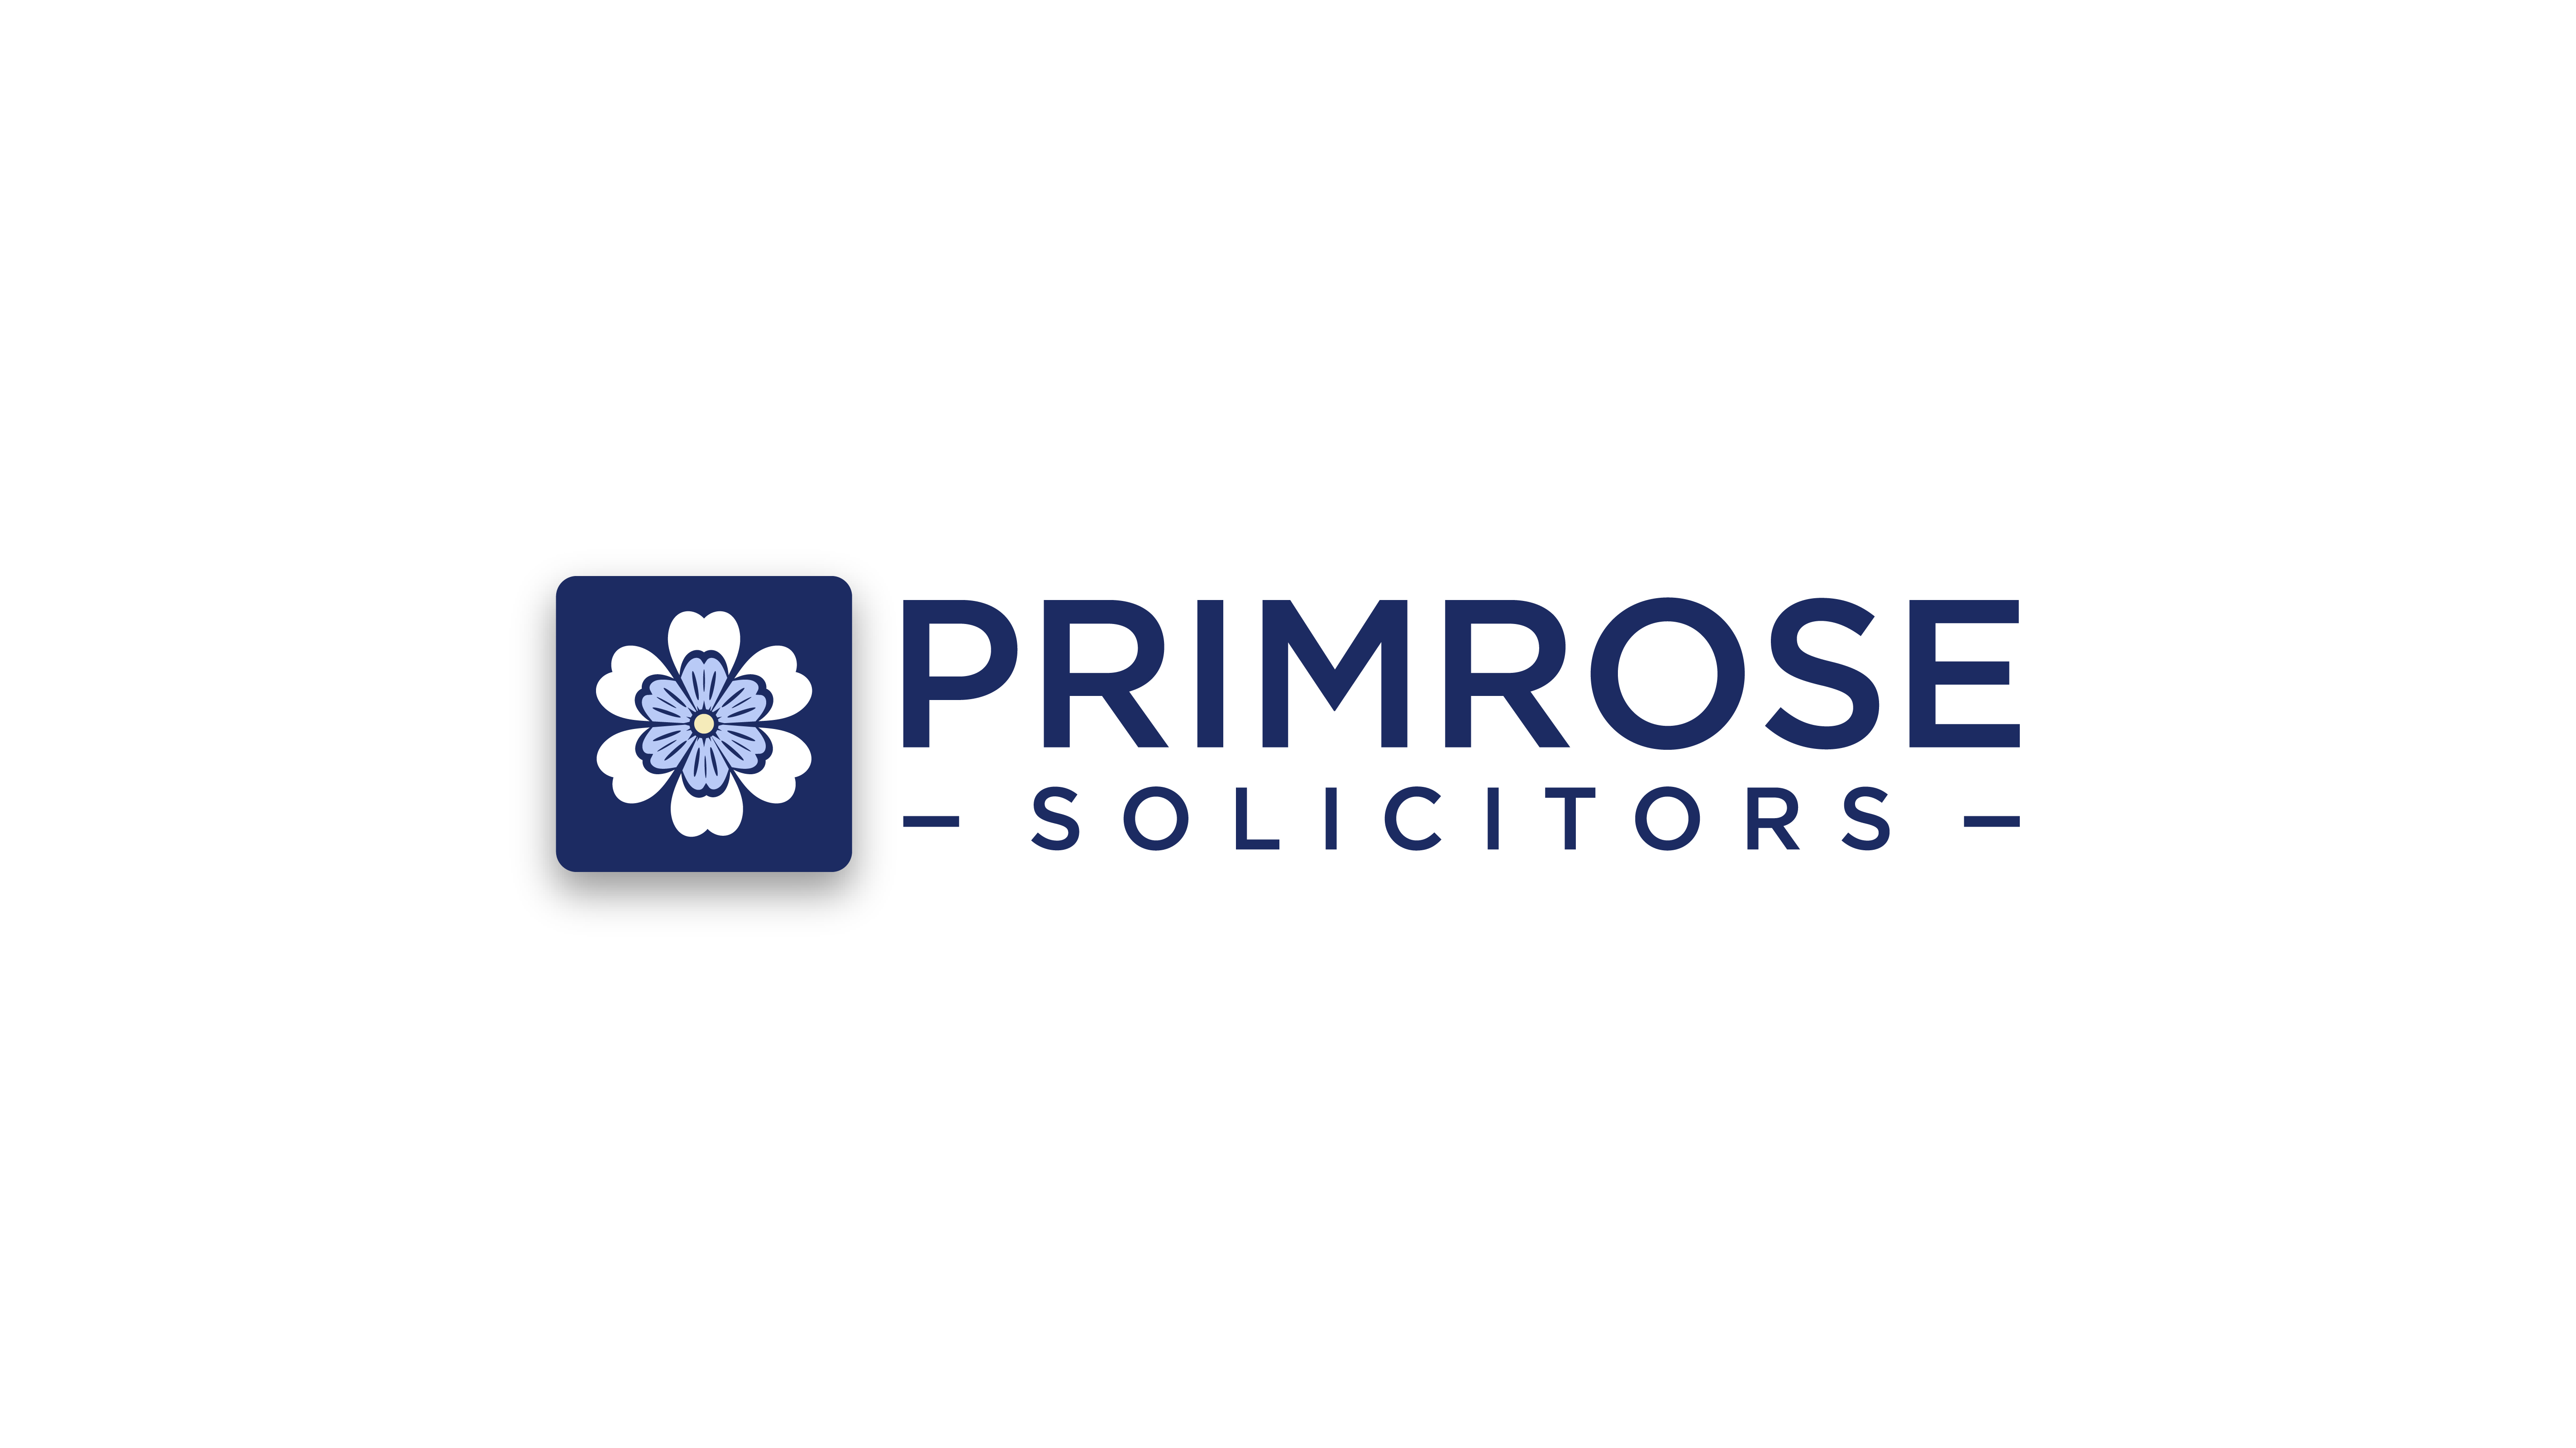 Logo of Primrose Solicitors Legal Services In Bury, Greater Manchester